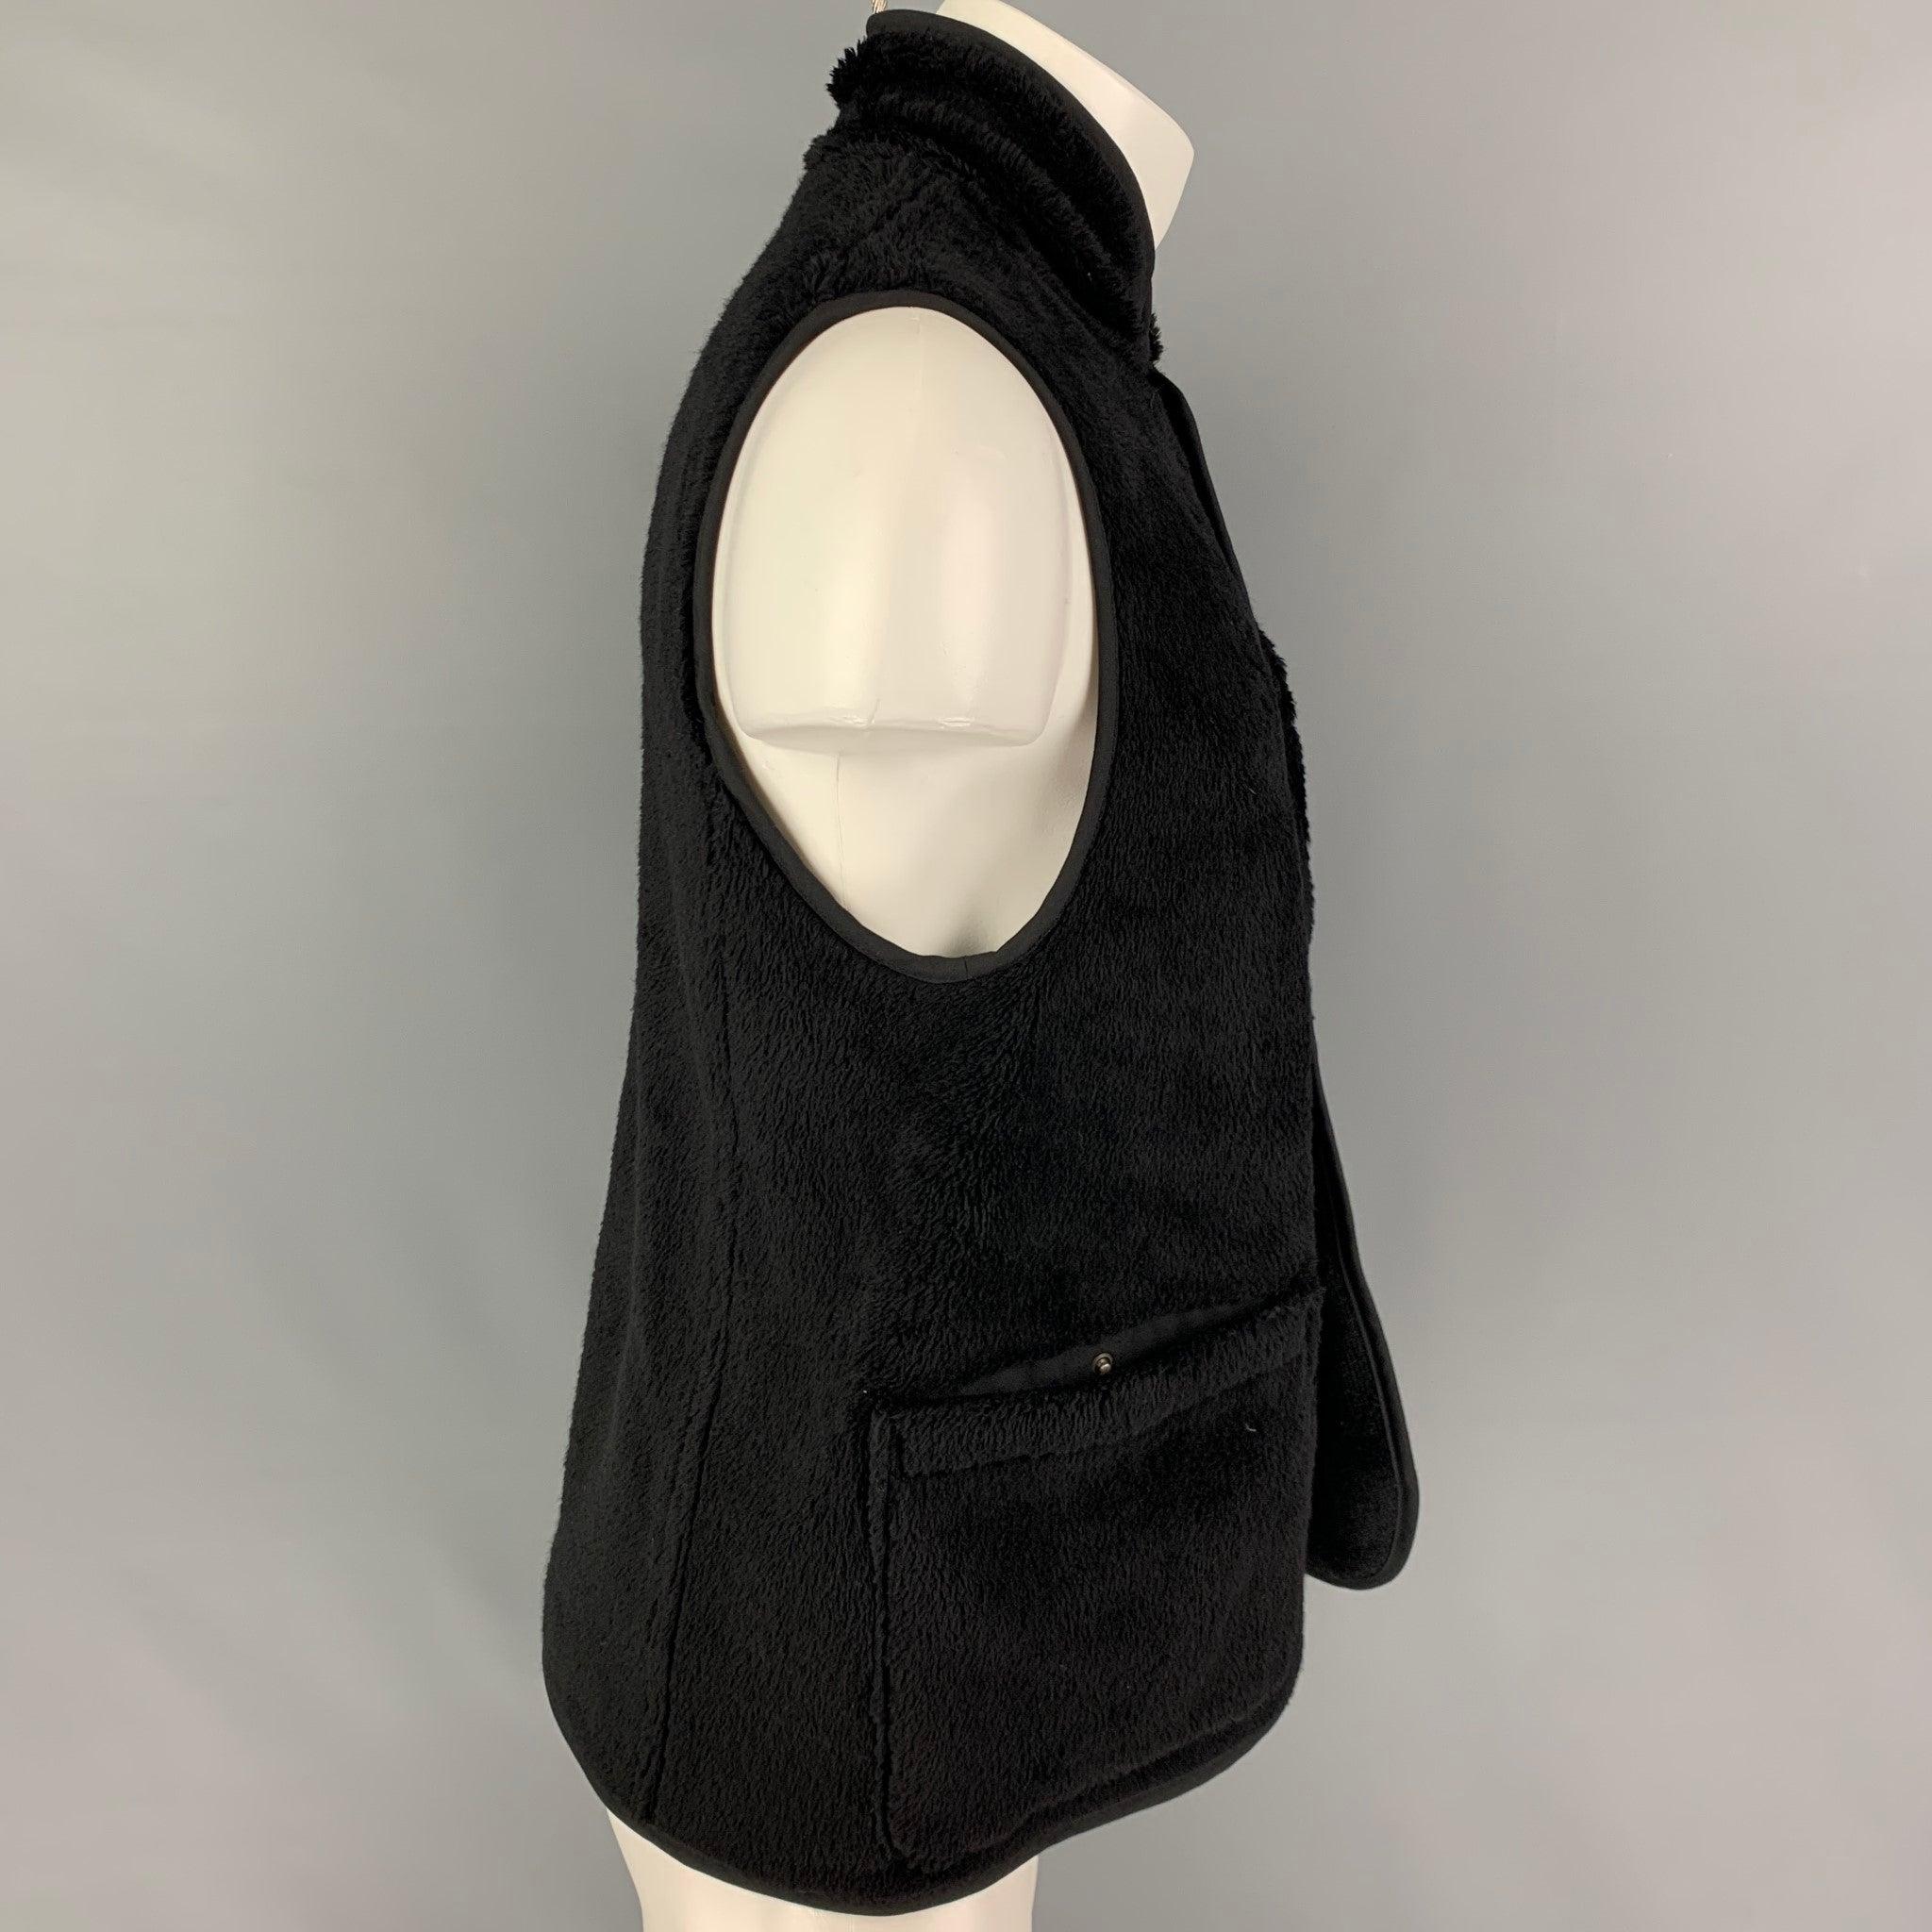 VISVIM SPORT vest comes in a black textured boa-fleece wool featuring a reversible style, patch pockets, stand collar, and a buttoned closure. Made in Japan.
Very Good
Pre-Owned Condition. Fabric tag removed.  

Marked:   3 

Measurements: 
